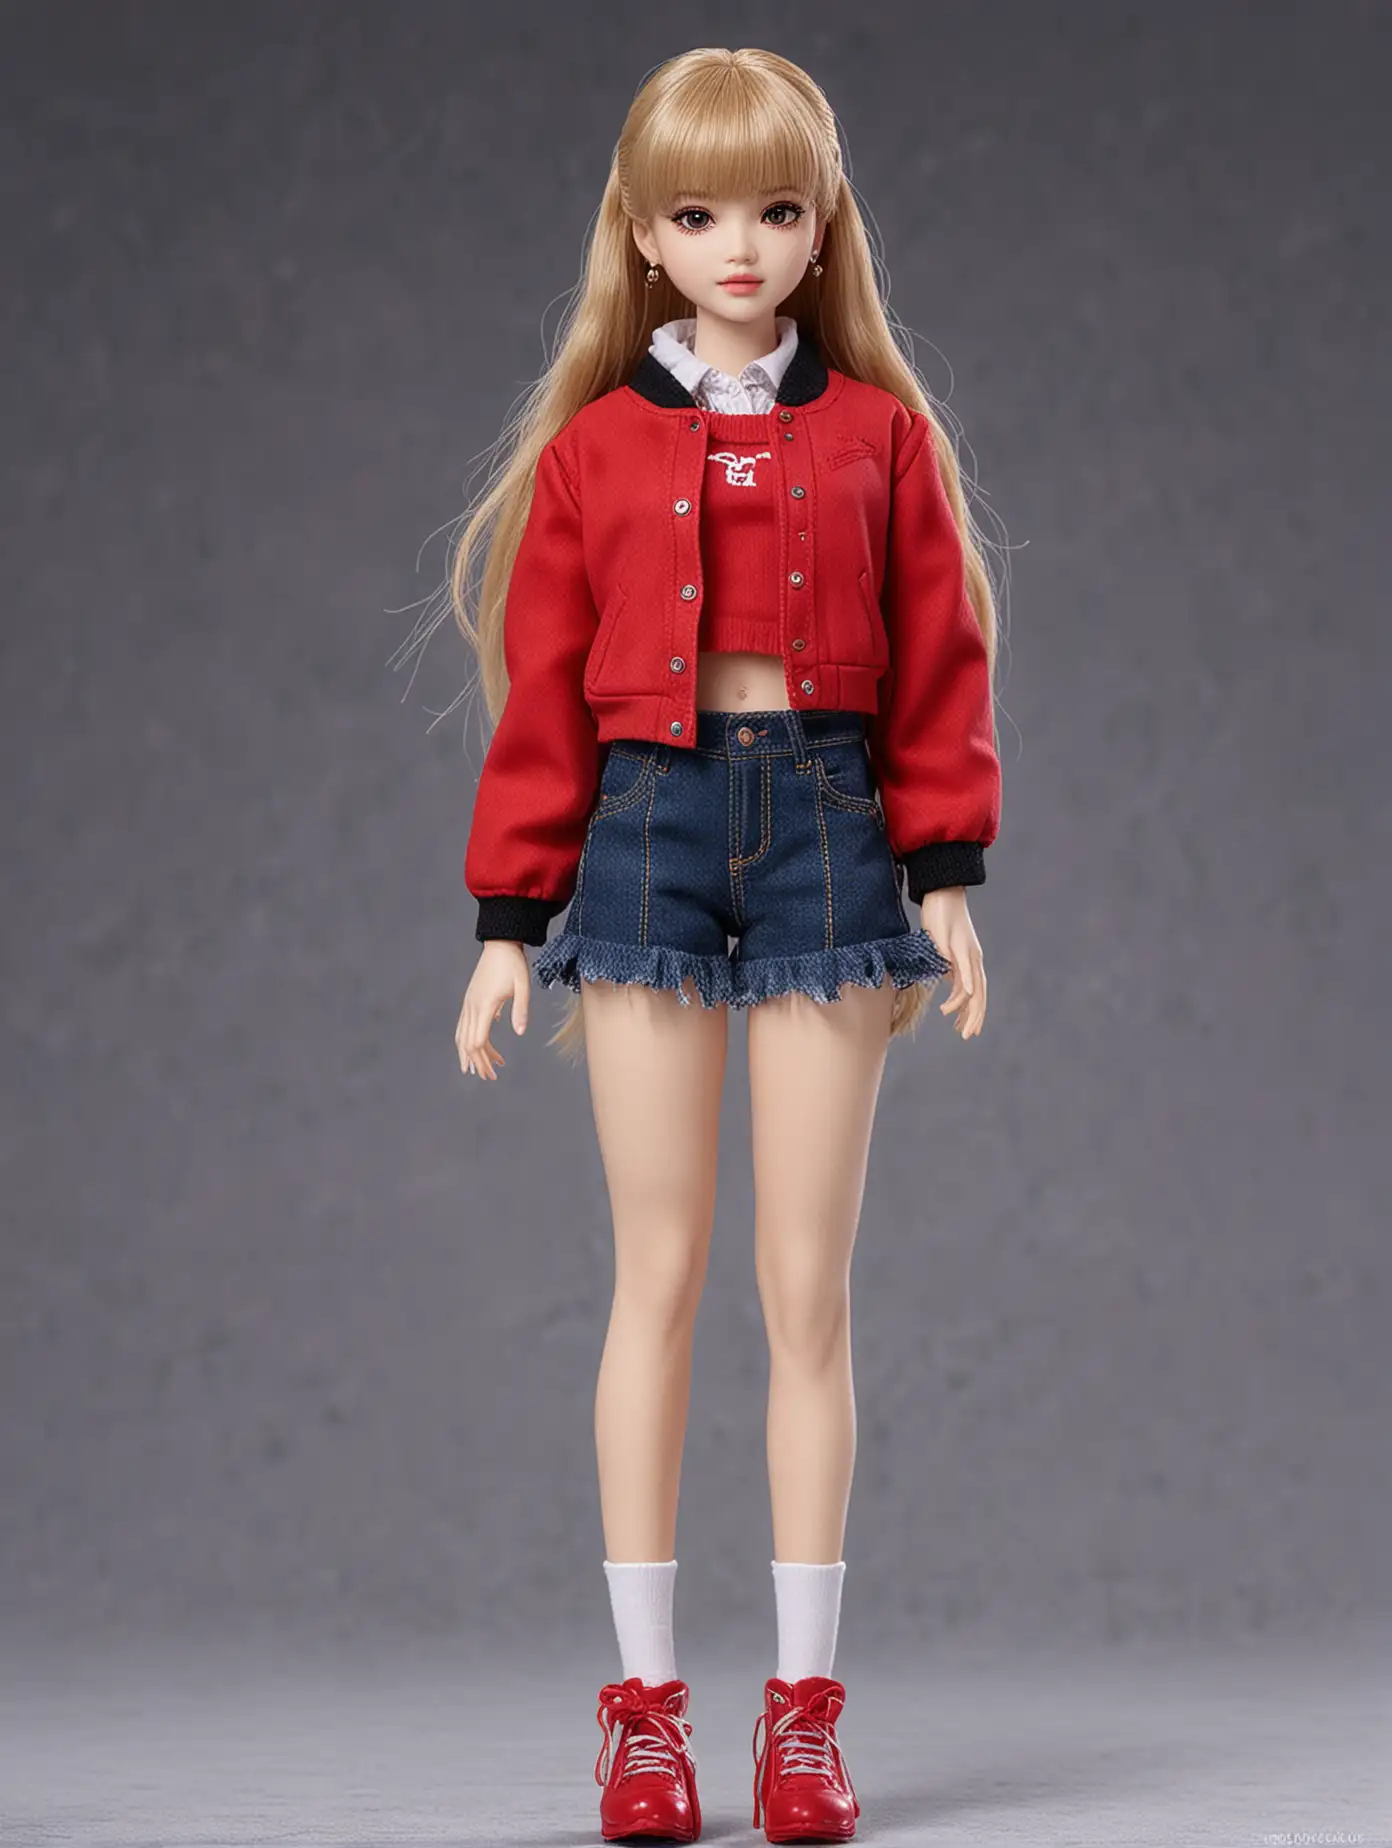 Blackpink Lisa Beautiful Doll. wearing a red jacket. Red shoes.